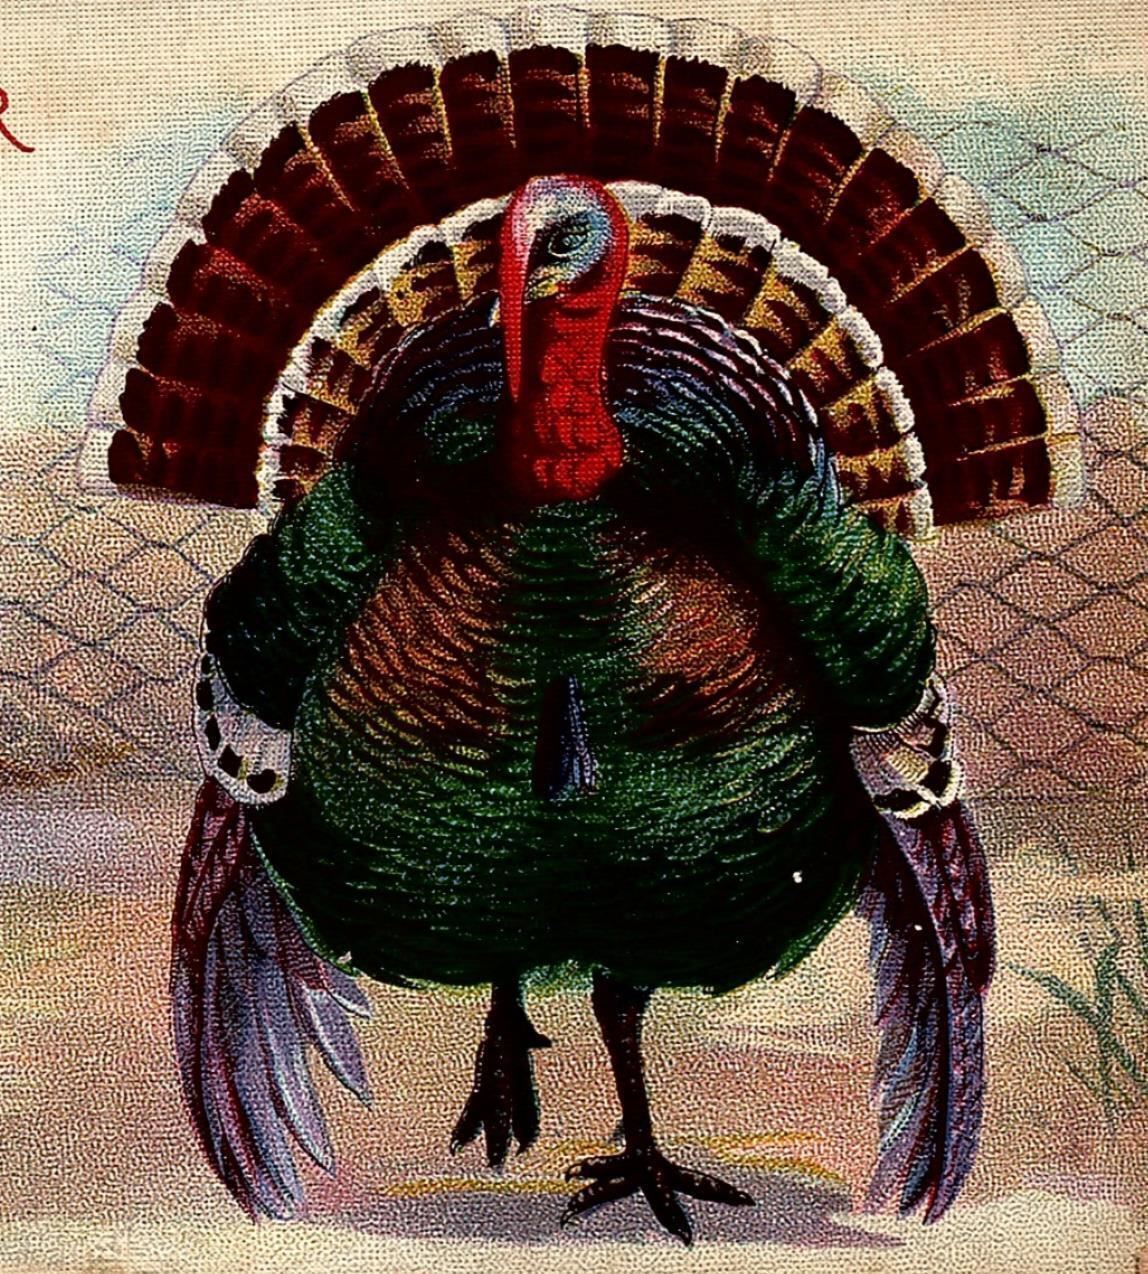 c1915 THANKSGIVING CHEER TURKEY POEM FENCE FOOD PAY COLORFUL POSTCARD 34-74